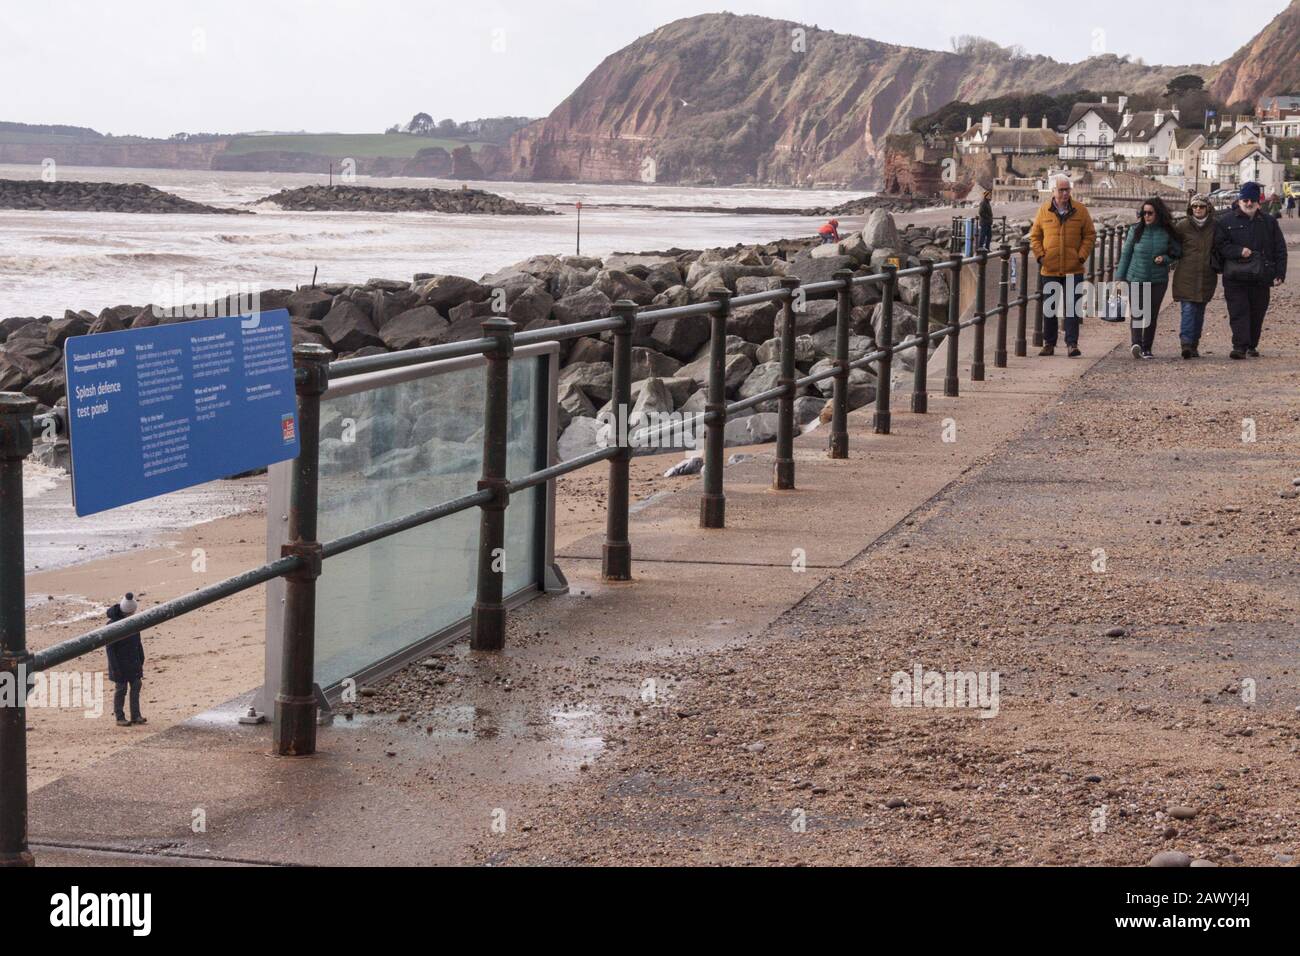 Sidmouth, Devon. 10th Feb 2020. UK Weather: Glass sea defence panels installed on test on the sea wall at Sidmouth, Devon, withstood the full battering of storm Ciara, which pounded the seafront, and the panels, with shale and rock. Credit: Photo Central/Alamy Live News Stock Photo